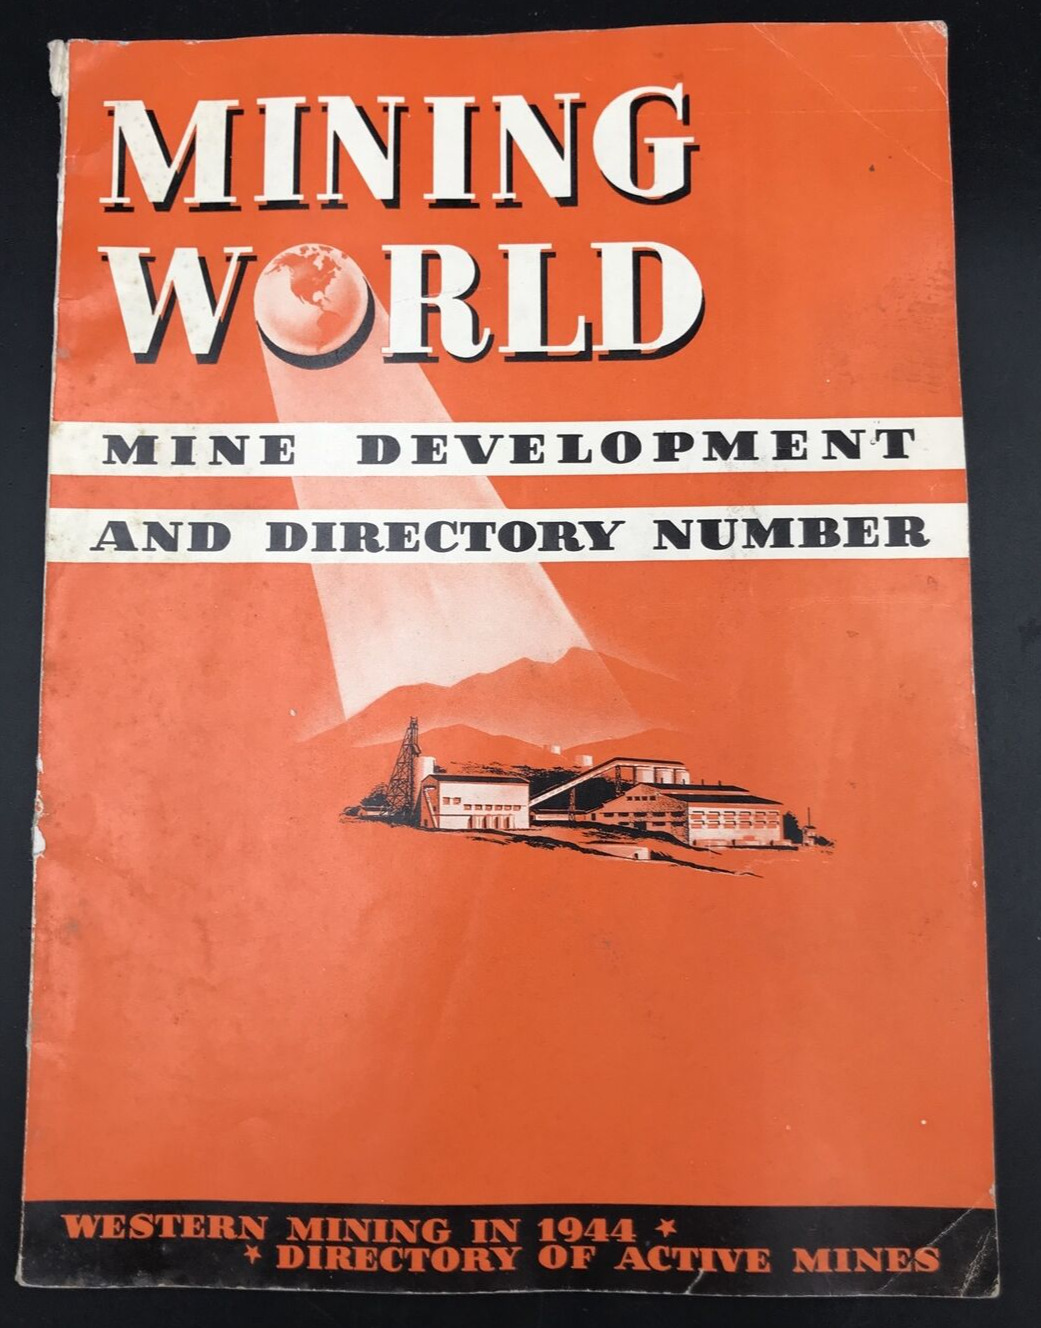 1944 Mining World Mine Development & Number Directory of Active Mines